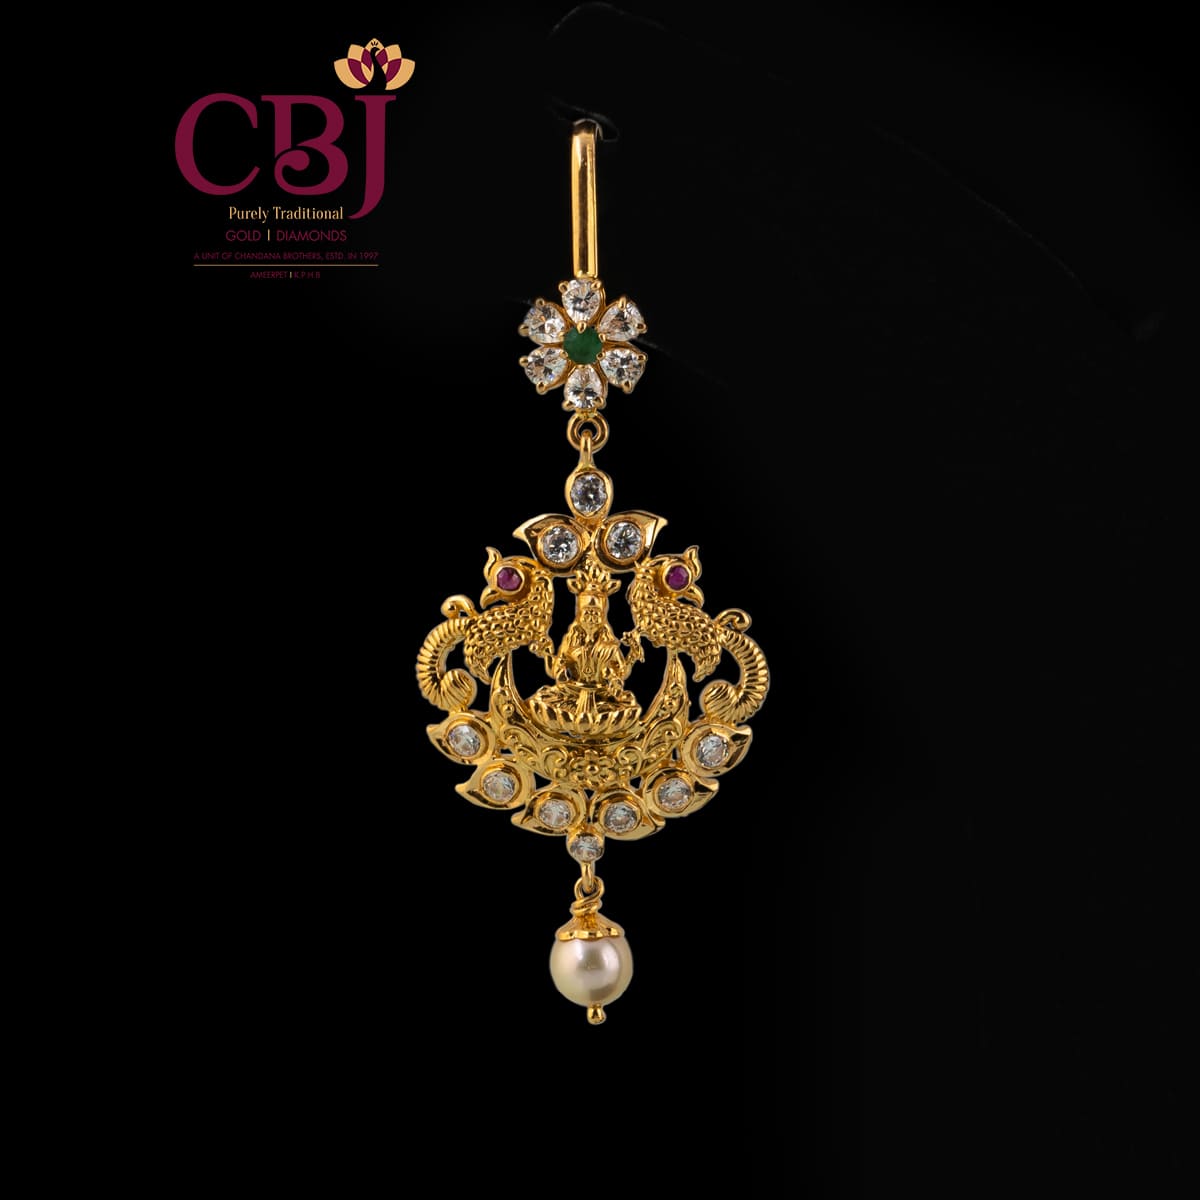 CZ Maang tikka featuring a contrast between gold and CZ stones